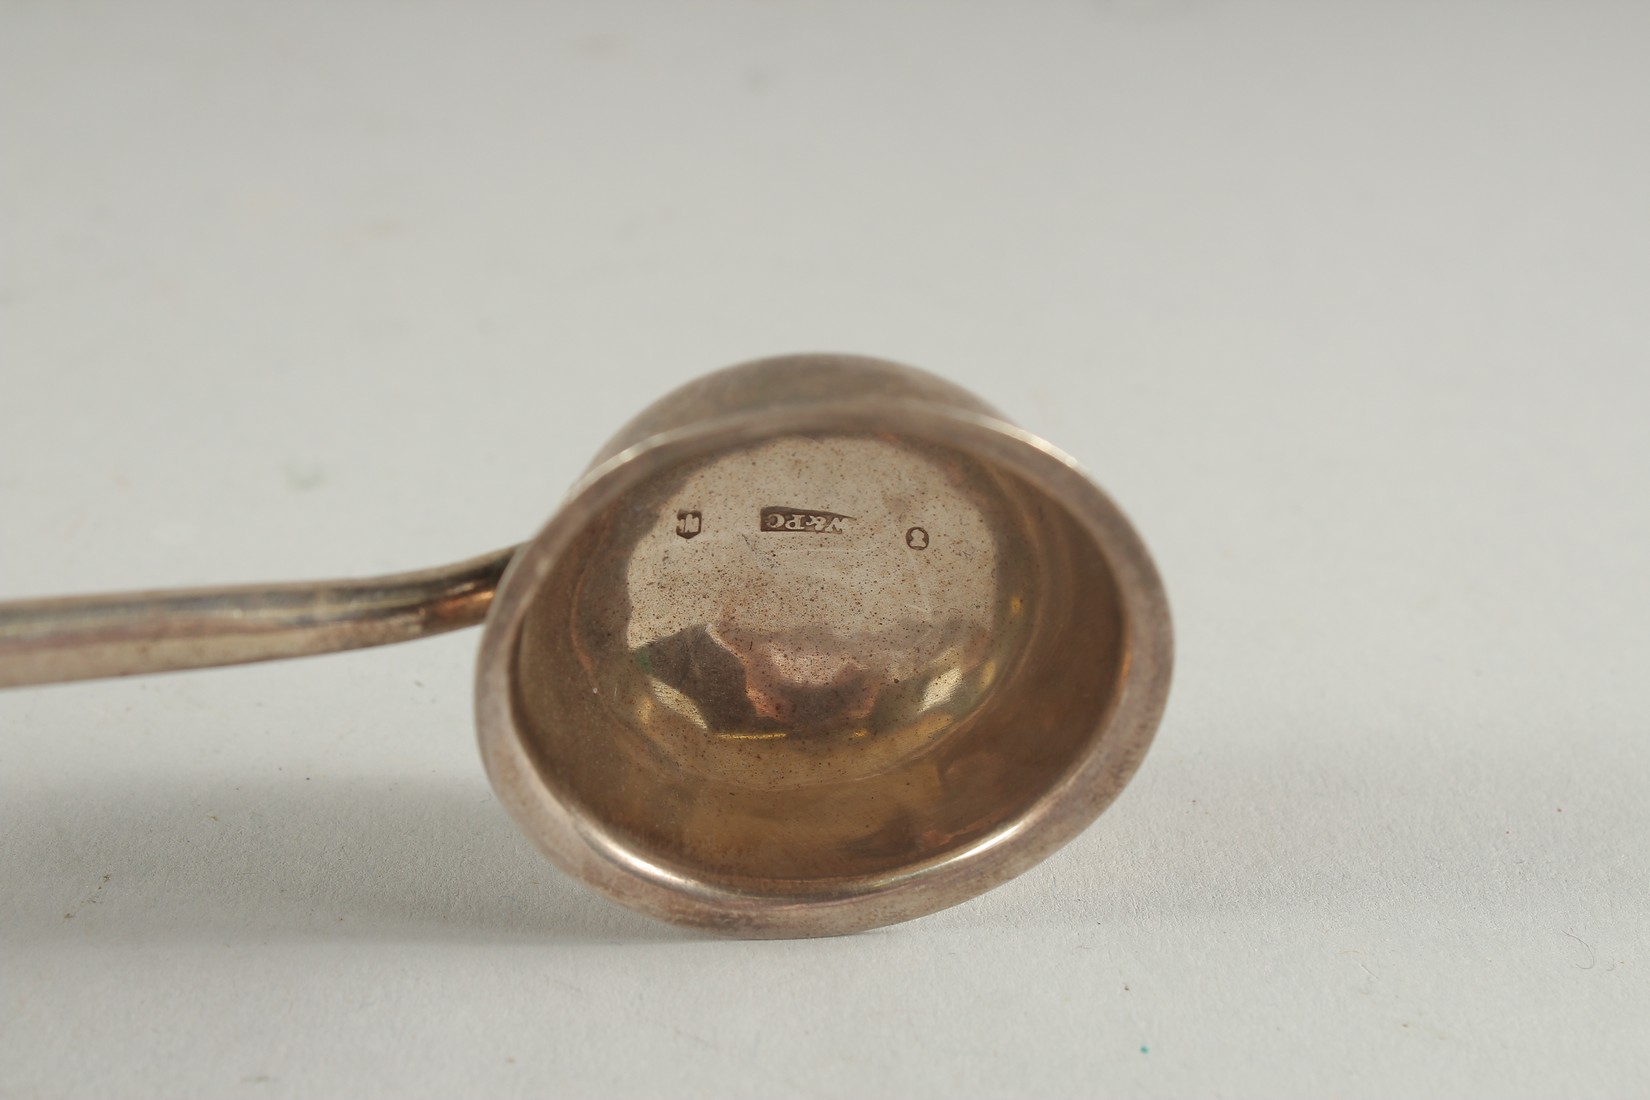 A GEORGE III SILVER TODY LADLE with wooden handle. Edinburgh, circa. 1800. - Image 4 of 4